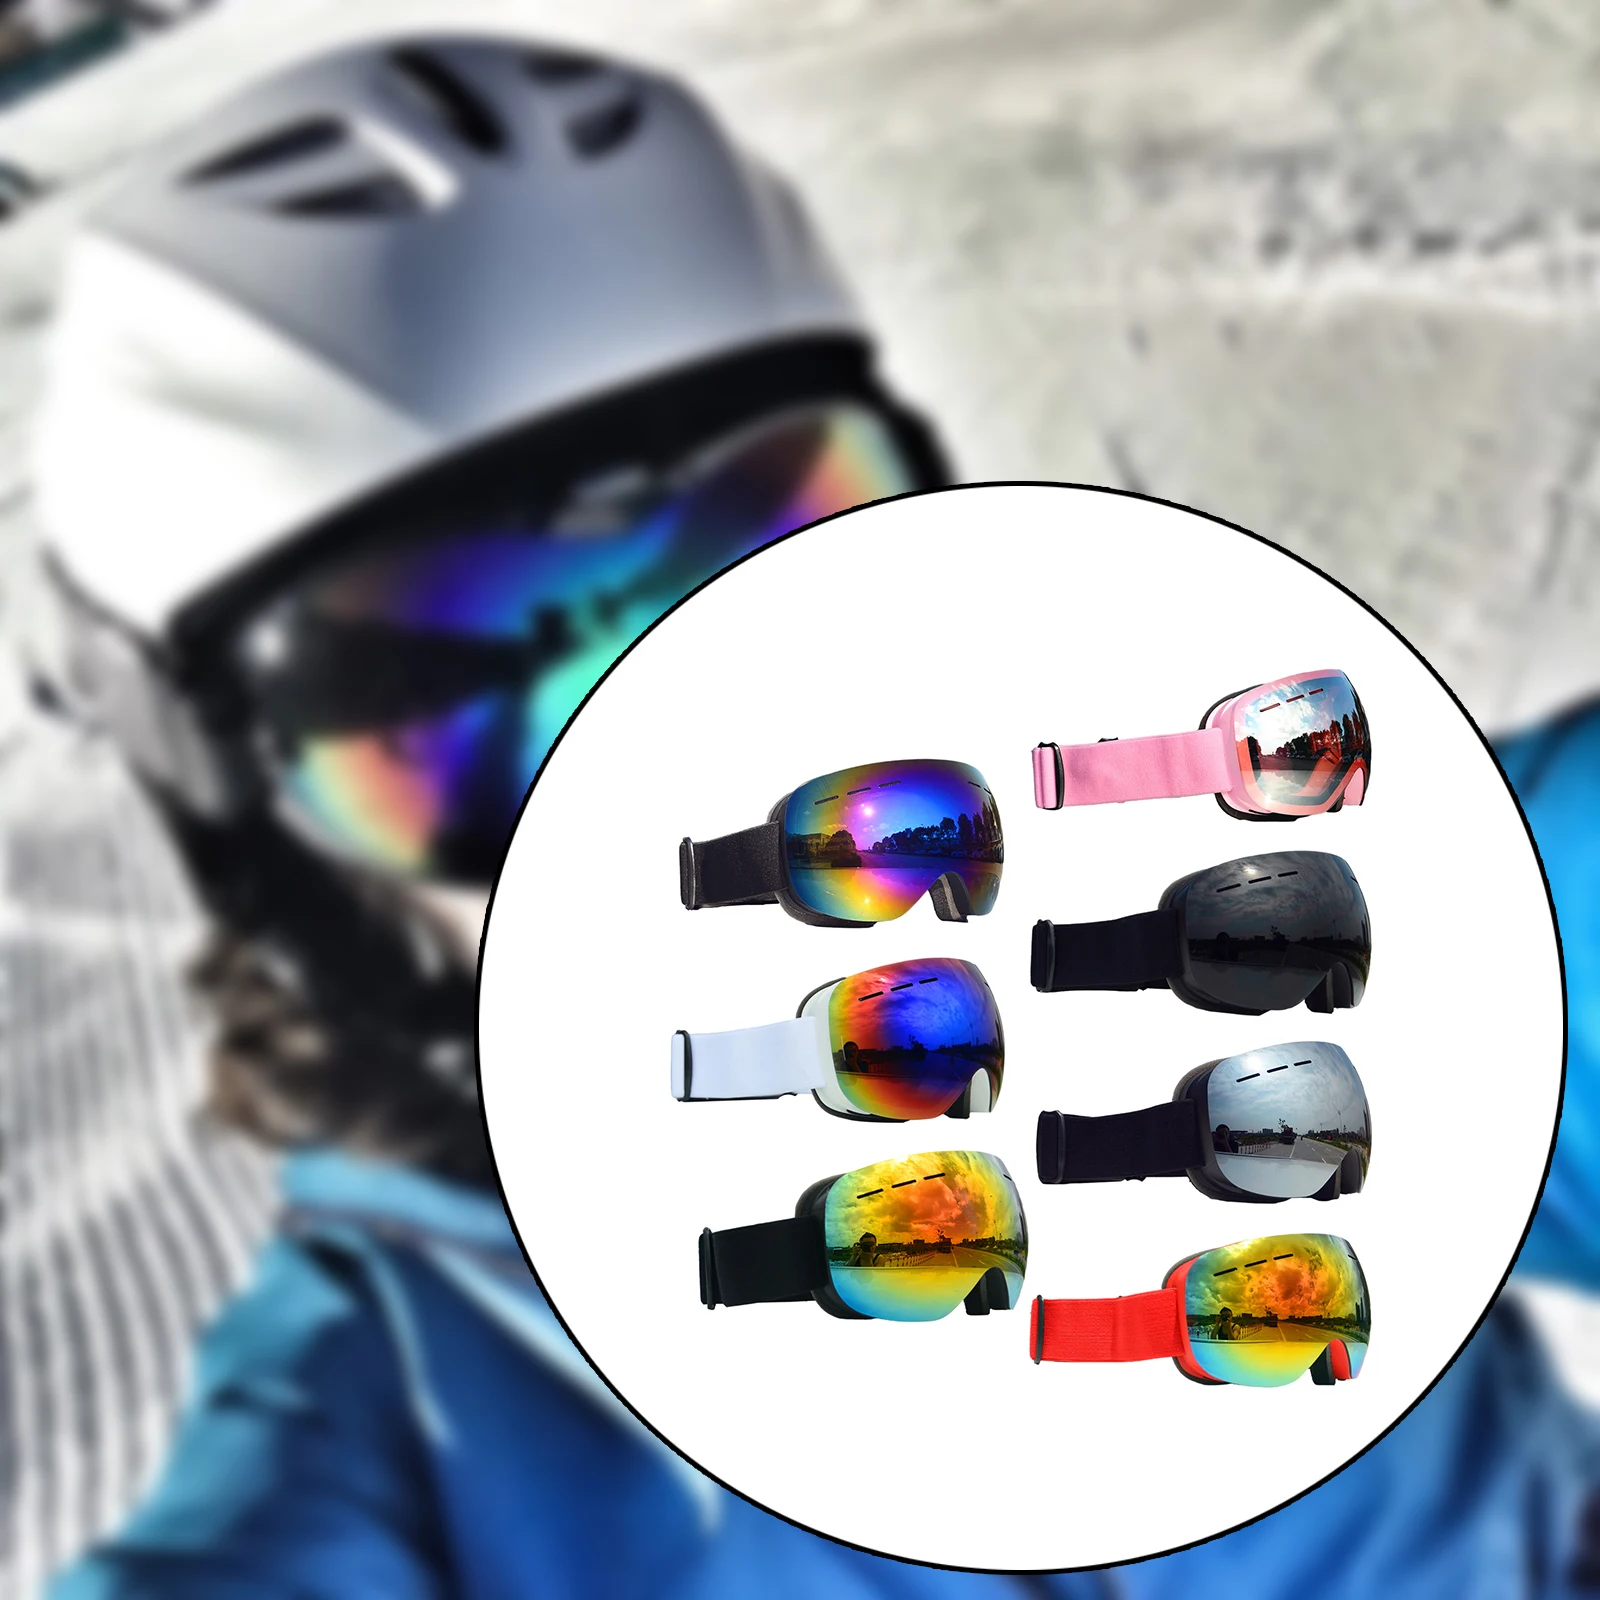 Skis ScratchPremium  Snow WindDustGlasses for Snowmobil Skiing Motorcycle Grunge Bike Motocross Youth